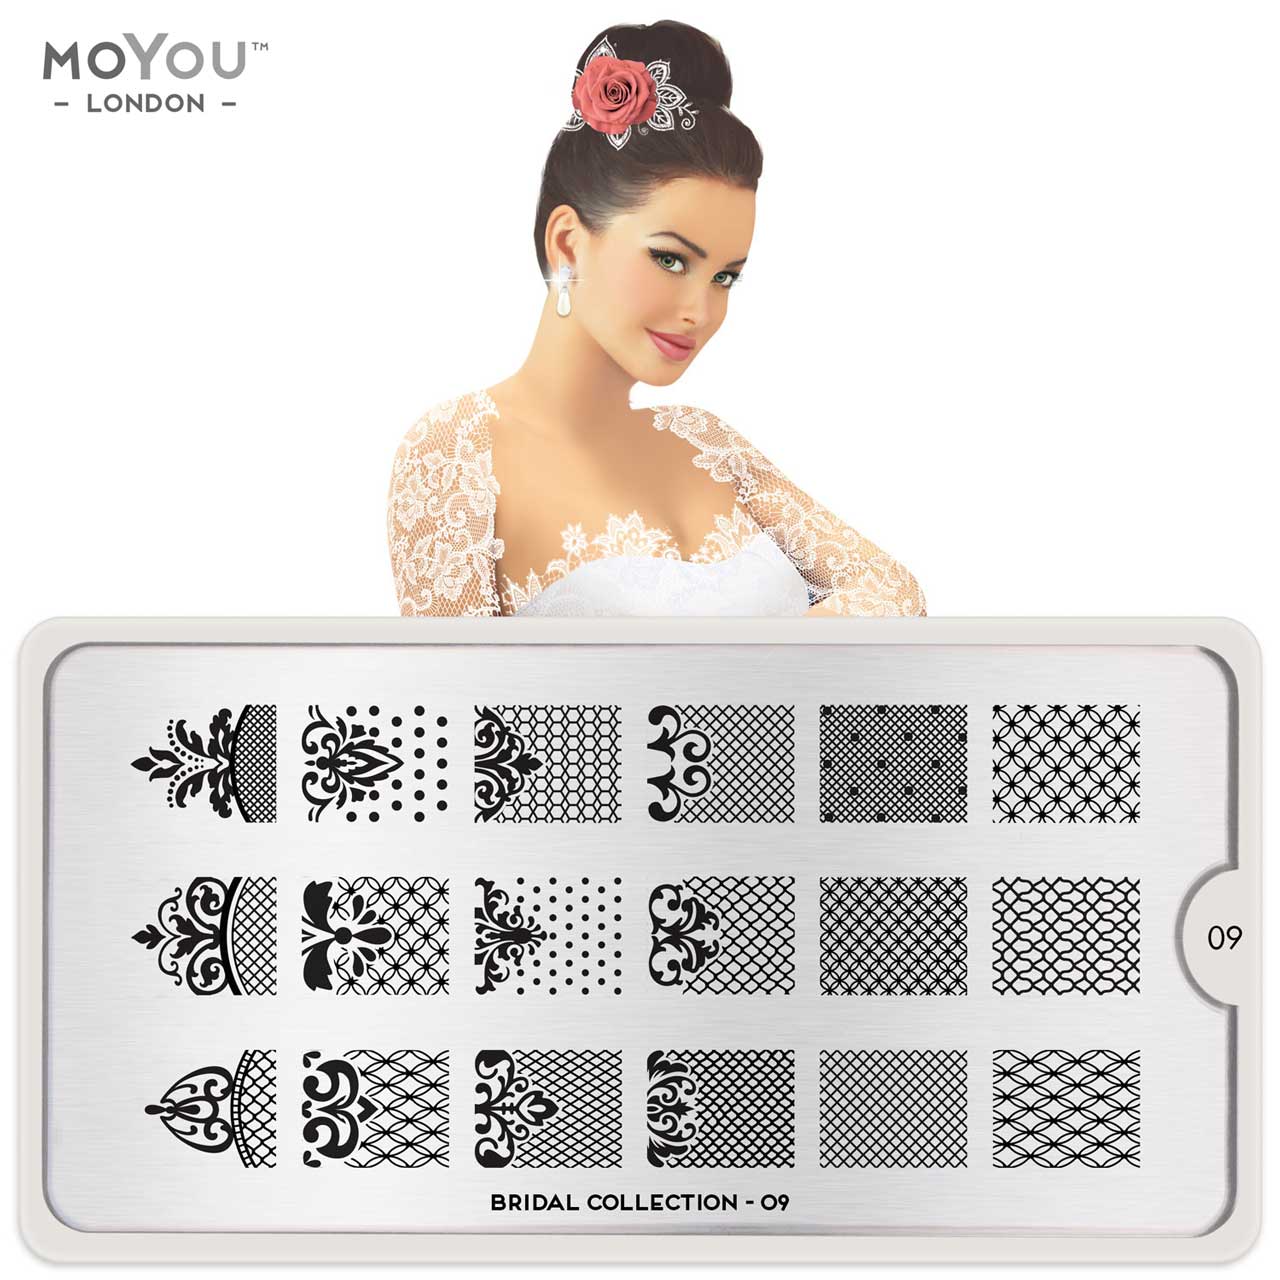 Plaque Stamping Bridal 09 - MoYou London